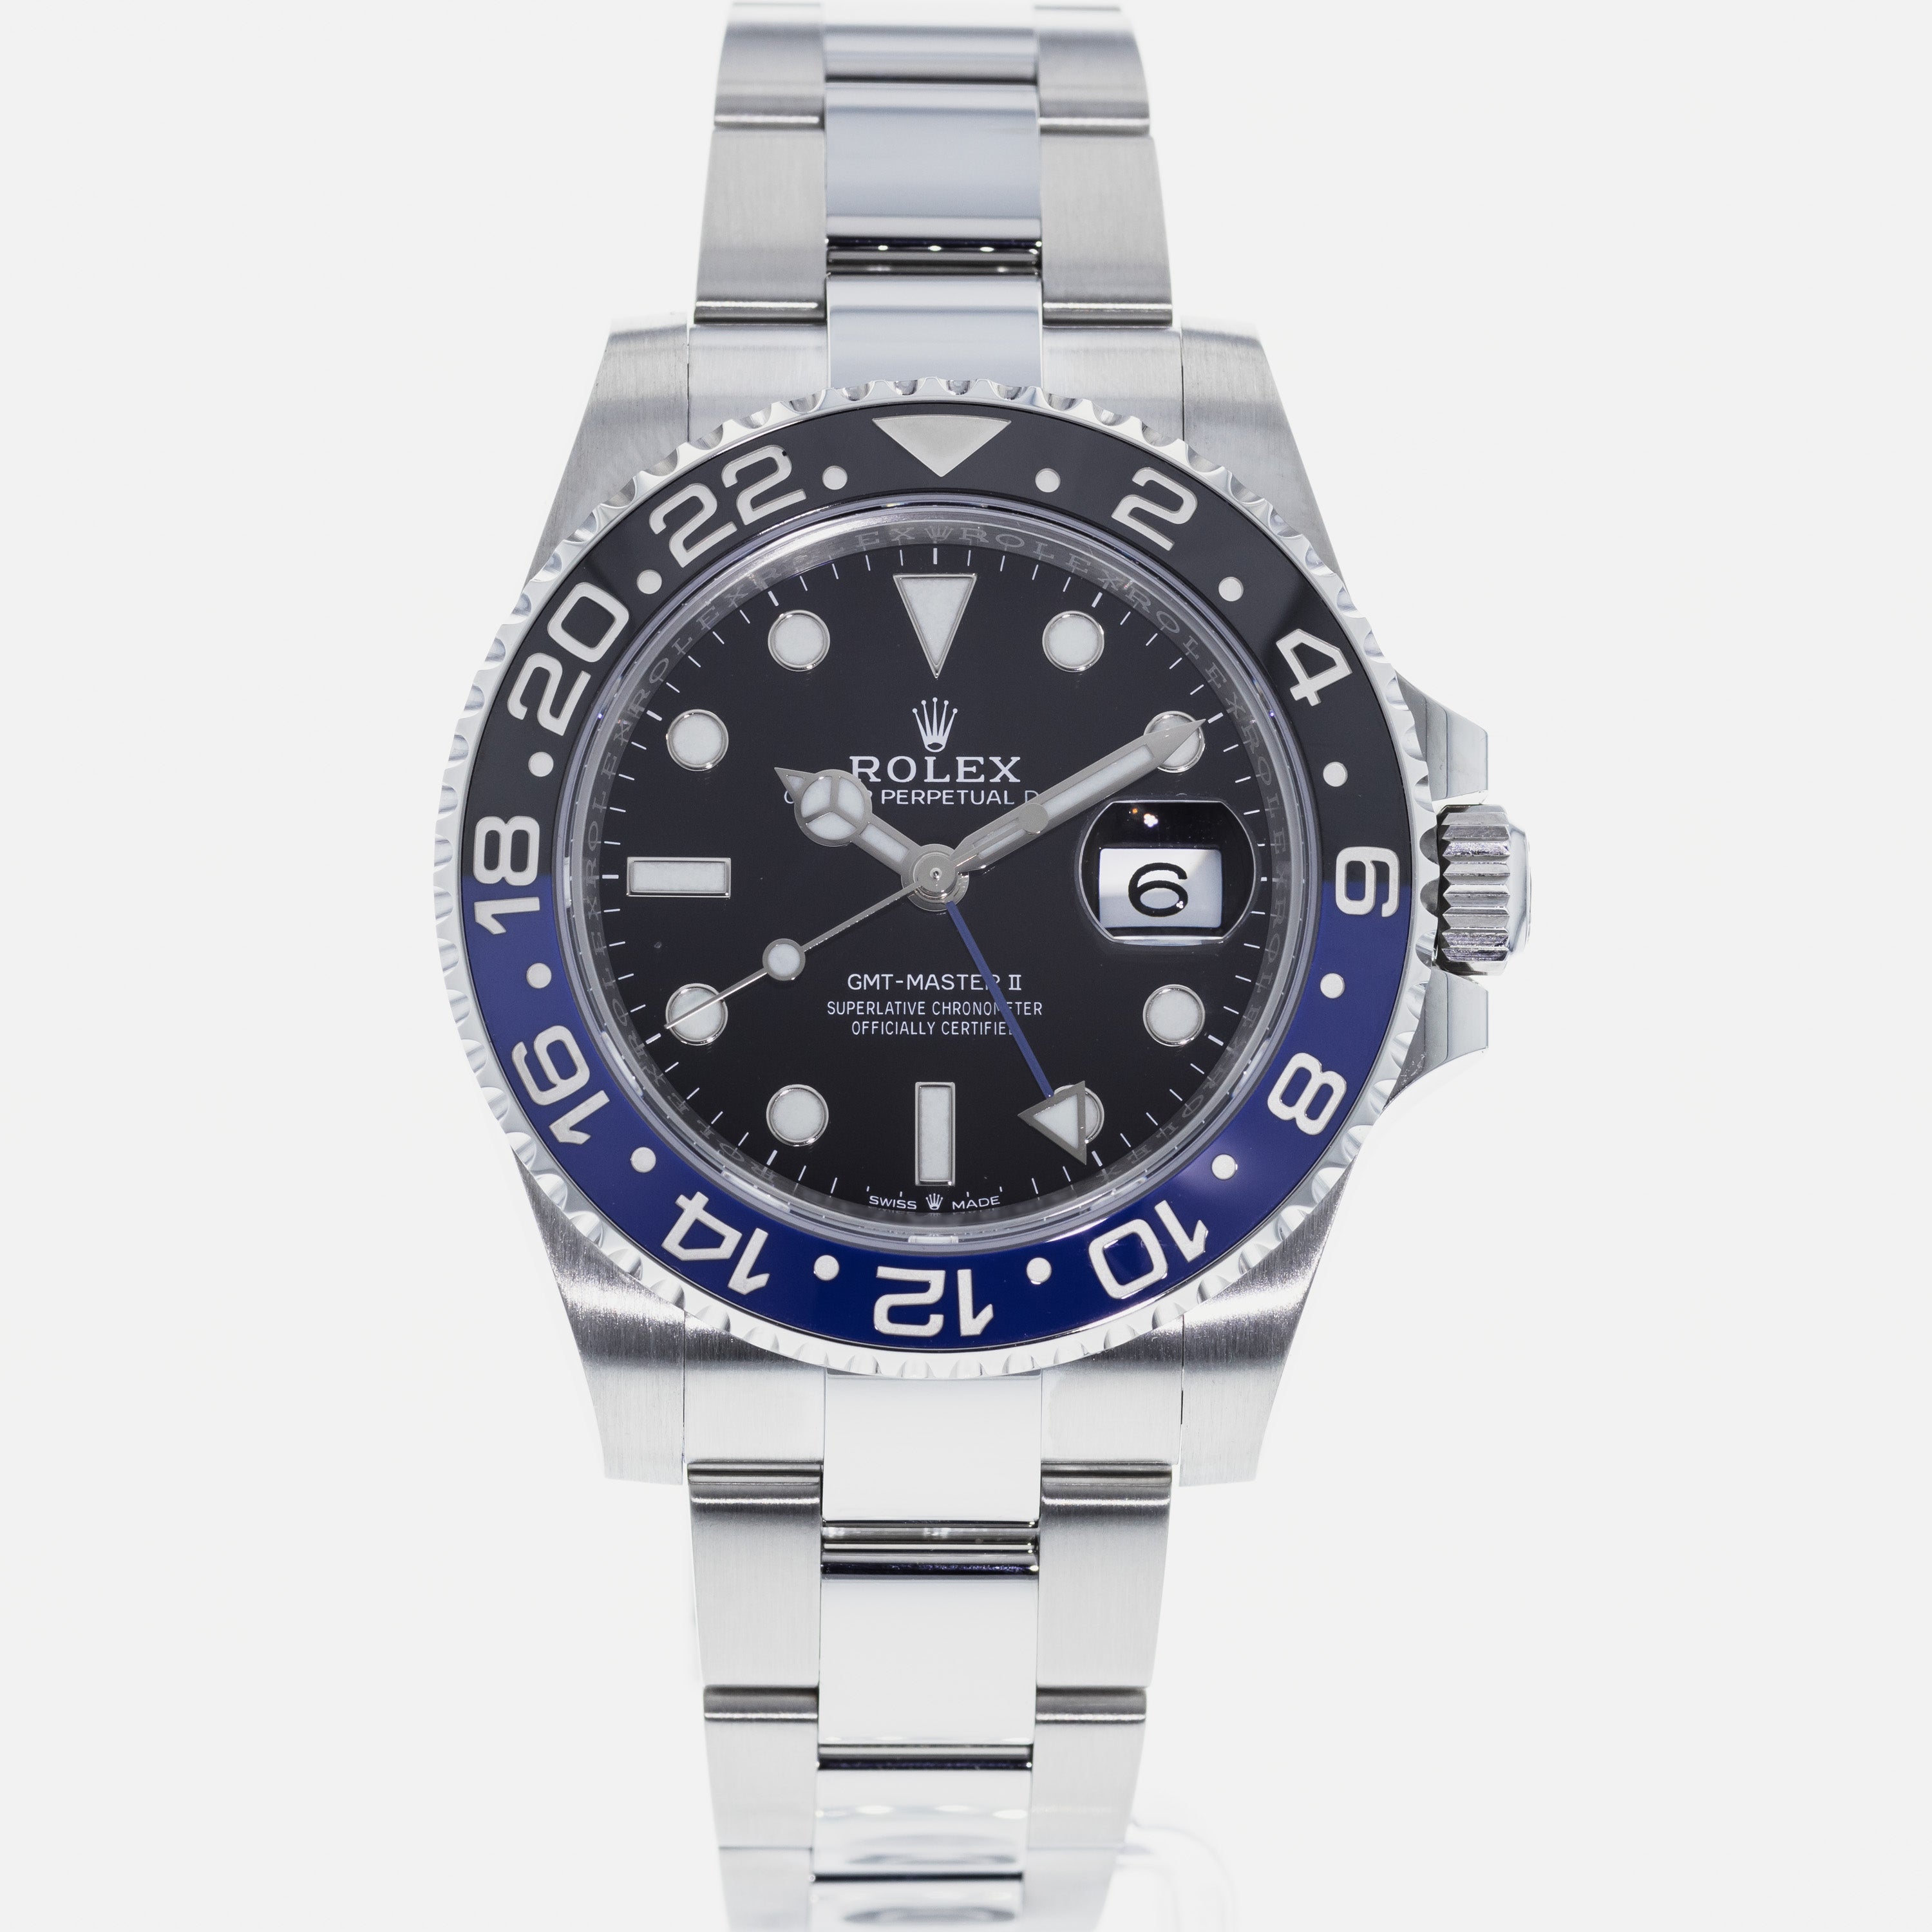 møde kamp Ofre Authentic Used Rolex GMT-Master II Batman 126710 Watch (10-10-ROL-X3BVCY)